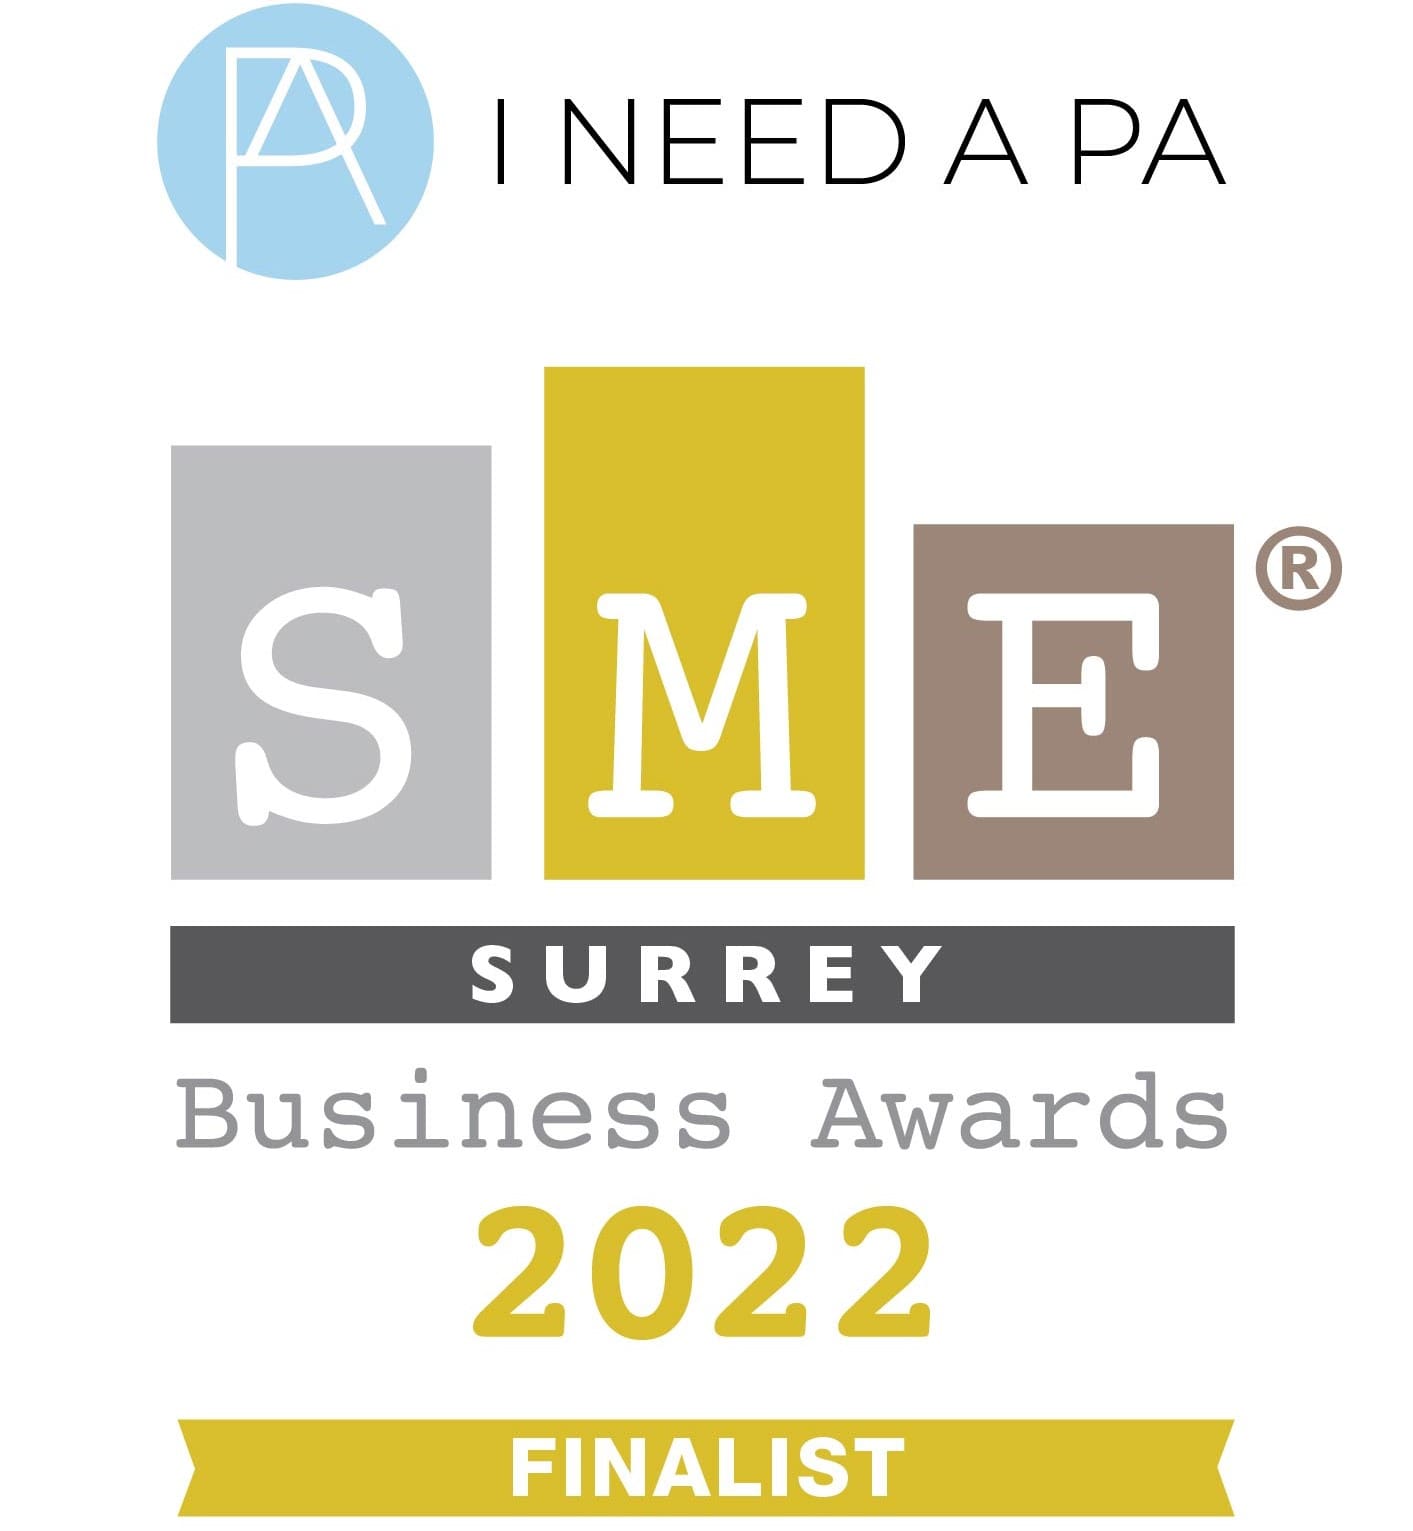 We are a finalist - SME Surrey Business Awards